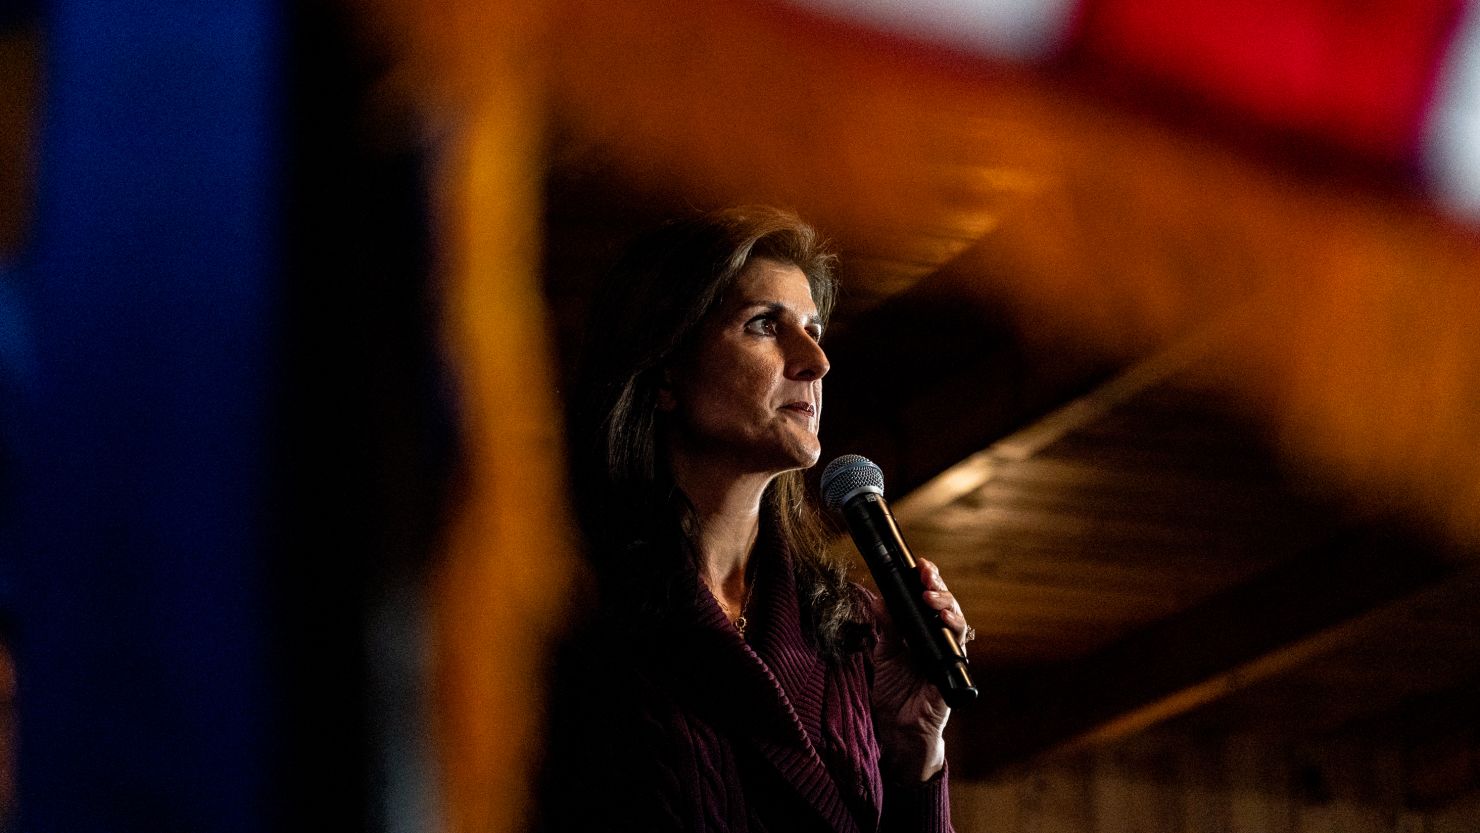 Republican Presidential candidate Nikki Haley meets and speaks to New Hampshire voters during a campaign rally in Hollis, New Hampshire on Thursday January 18, 2024. (Melina Mara/The Washington Post via Getty Images)